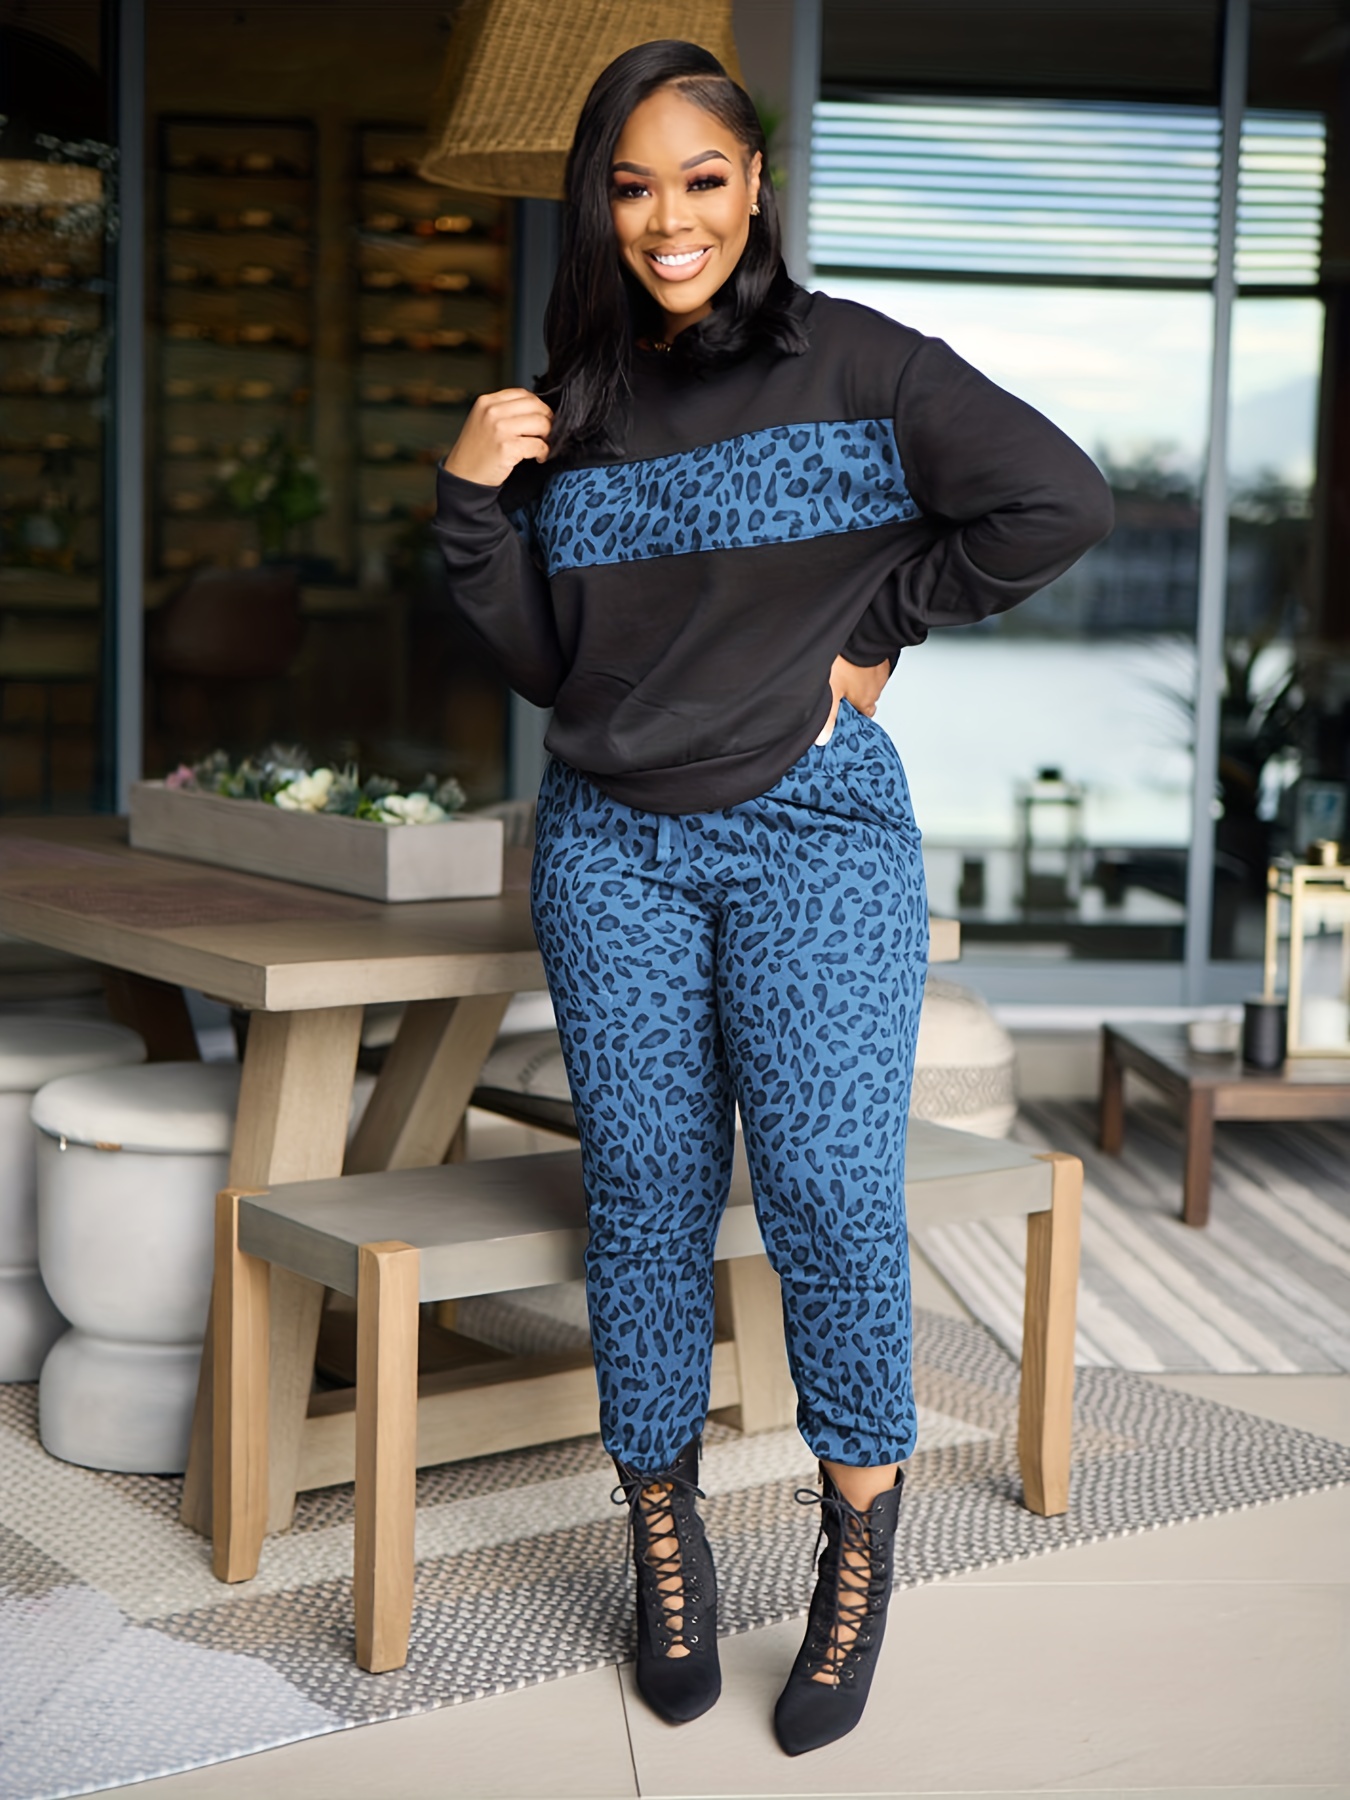 Leopard Print Plus Size Tracksuit Set With Long Sleeve Baja Hoodie And Pants  For Women Perfect For Jogging, Sports Outfits, And Dropshipping Wholesale  L220905 From Yanqin03, $24.47